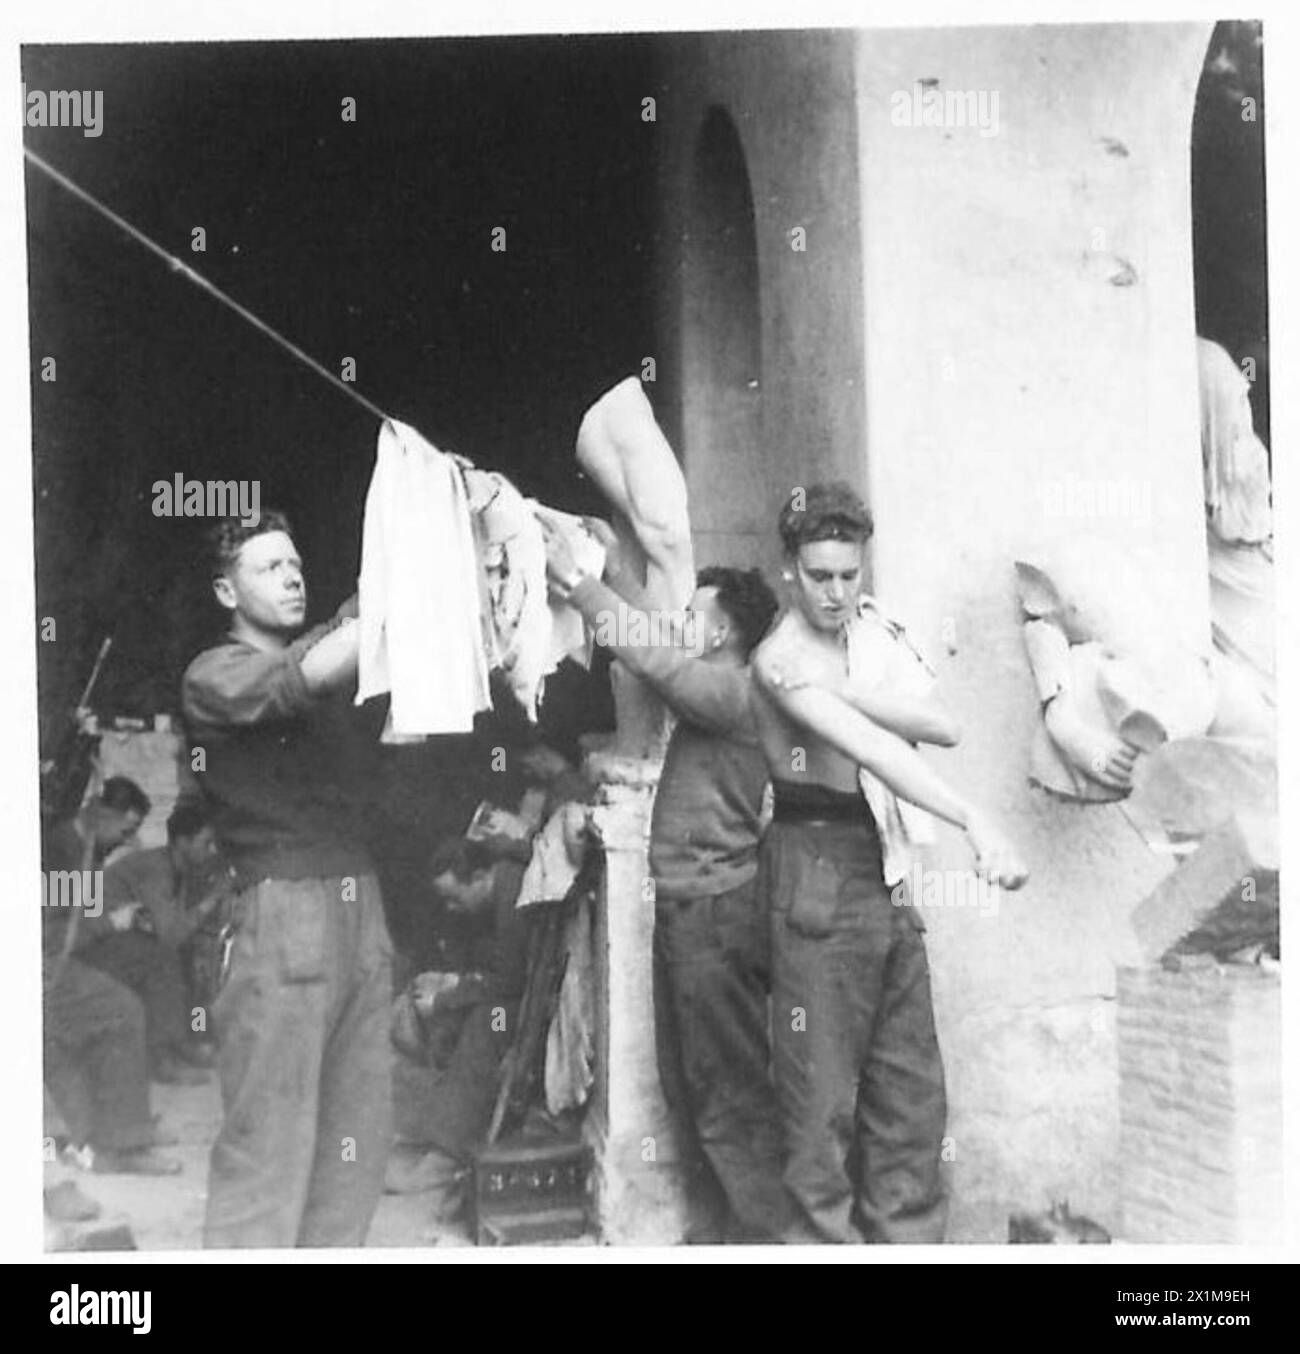 THE BRITISH ARMY IN NORTH AFRICA, SICILY, ITALY, THE BALKANS AND AUSTRIA 1942-1946 - Rfn. A. Forster of Purley, Frn. B. Joel of Norwood, Rfn. S. Rason of Holloway, London hanging up some clothing to dry, British Army Stock Photo